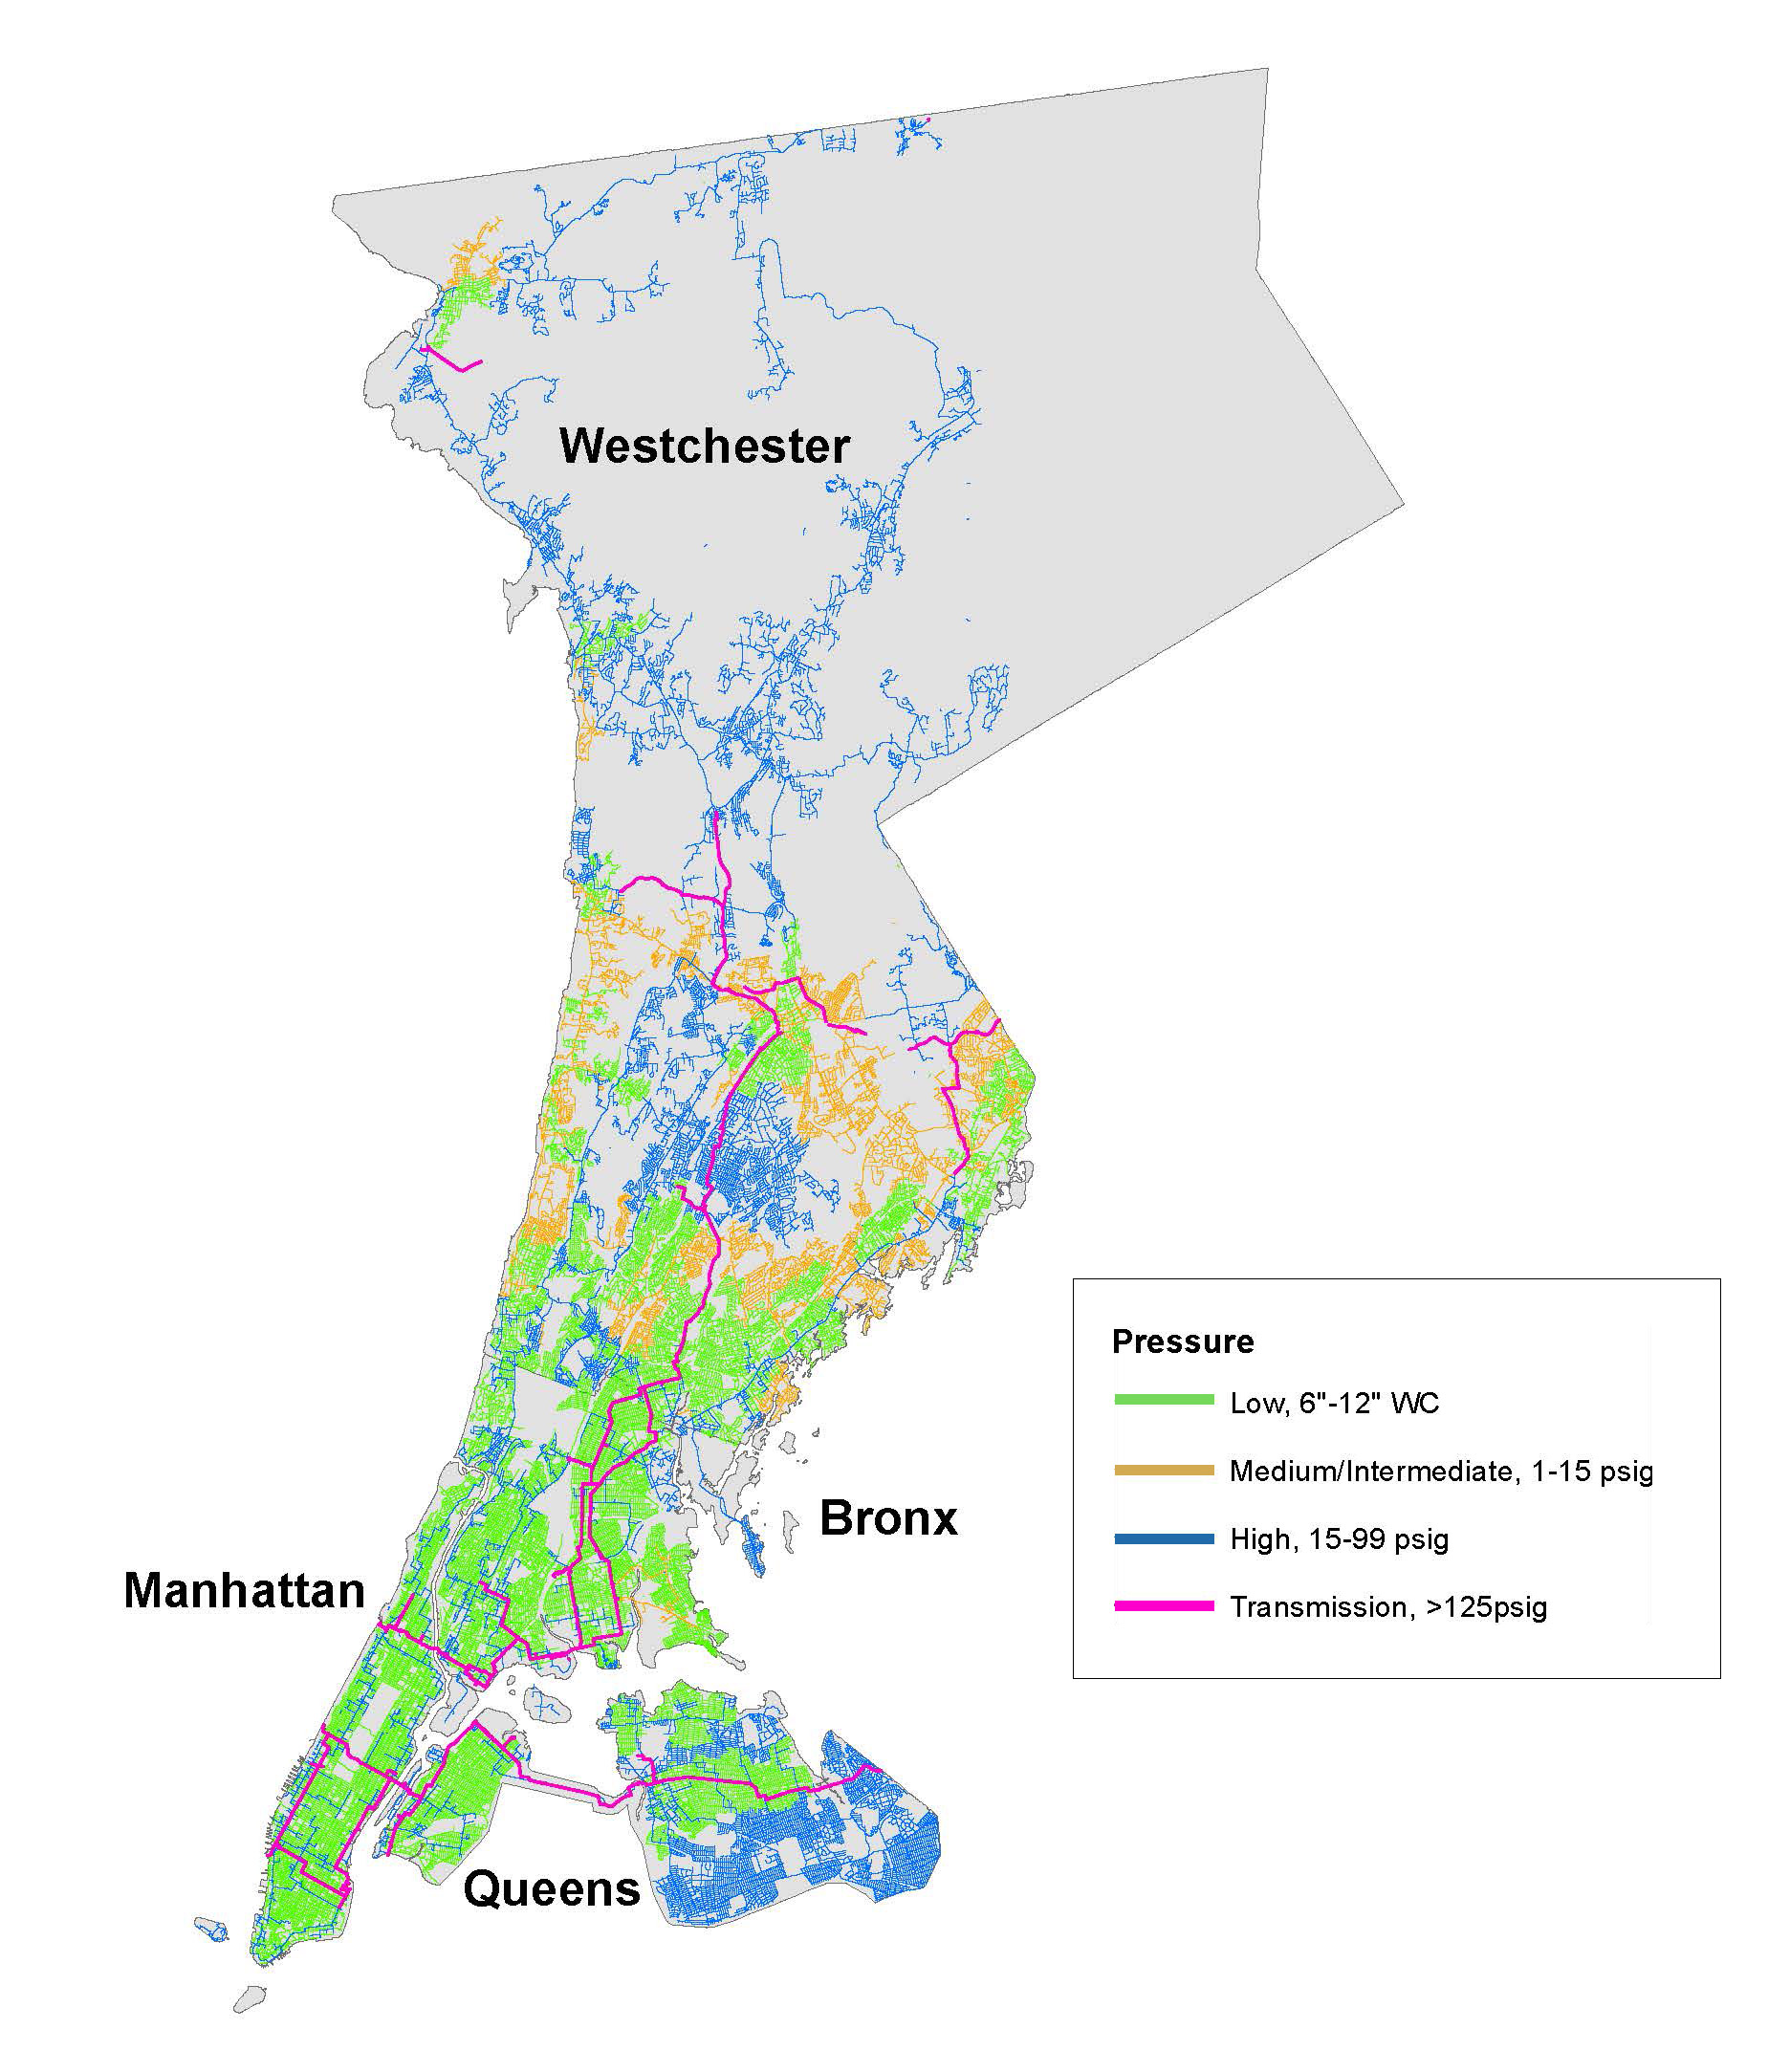 A service territory map of Manhattan, Queens, the Bronx and Westchester.